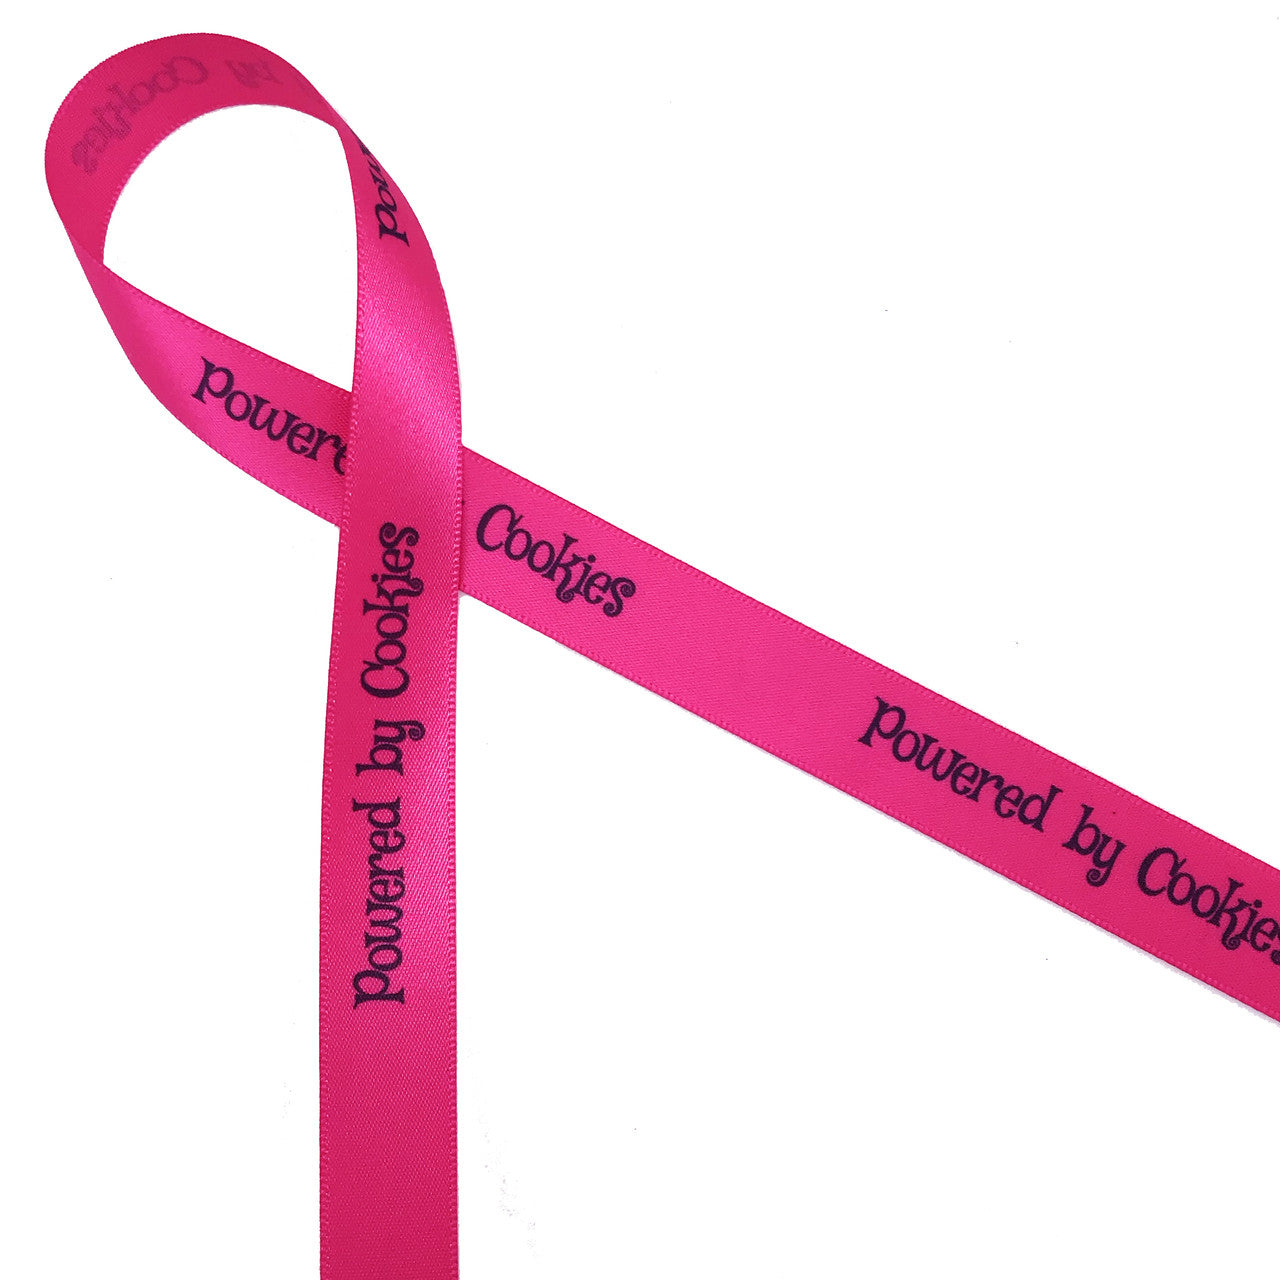 Powered by Cookies ribbon in black on 5/8" hot pink single face satin